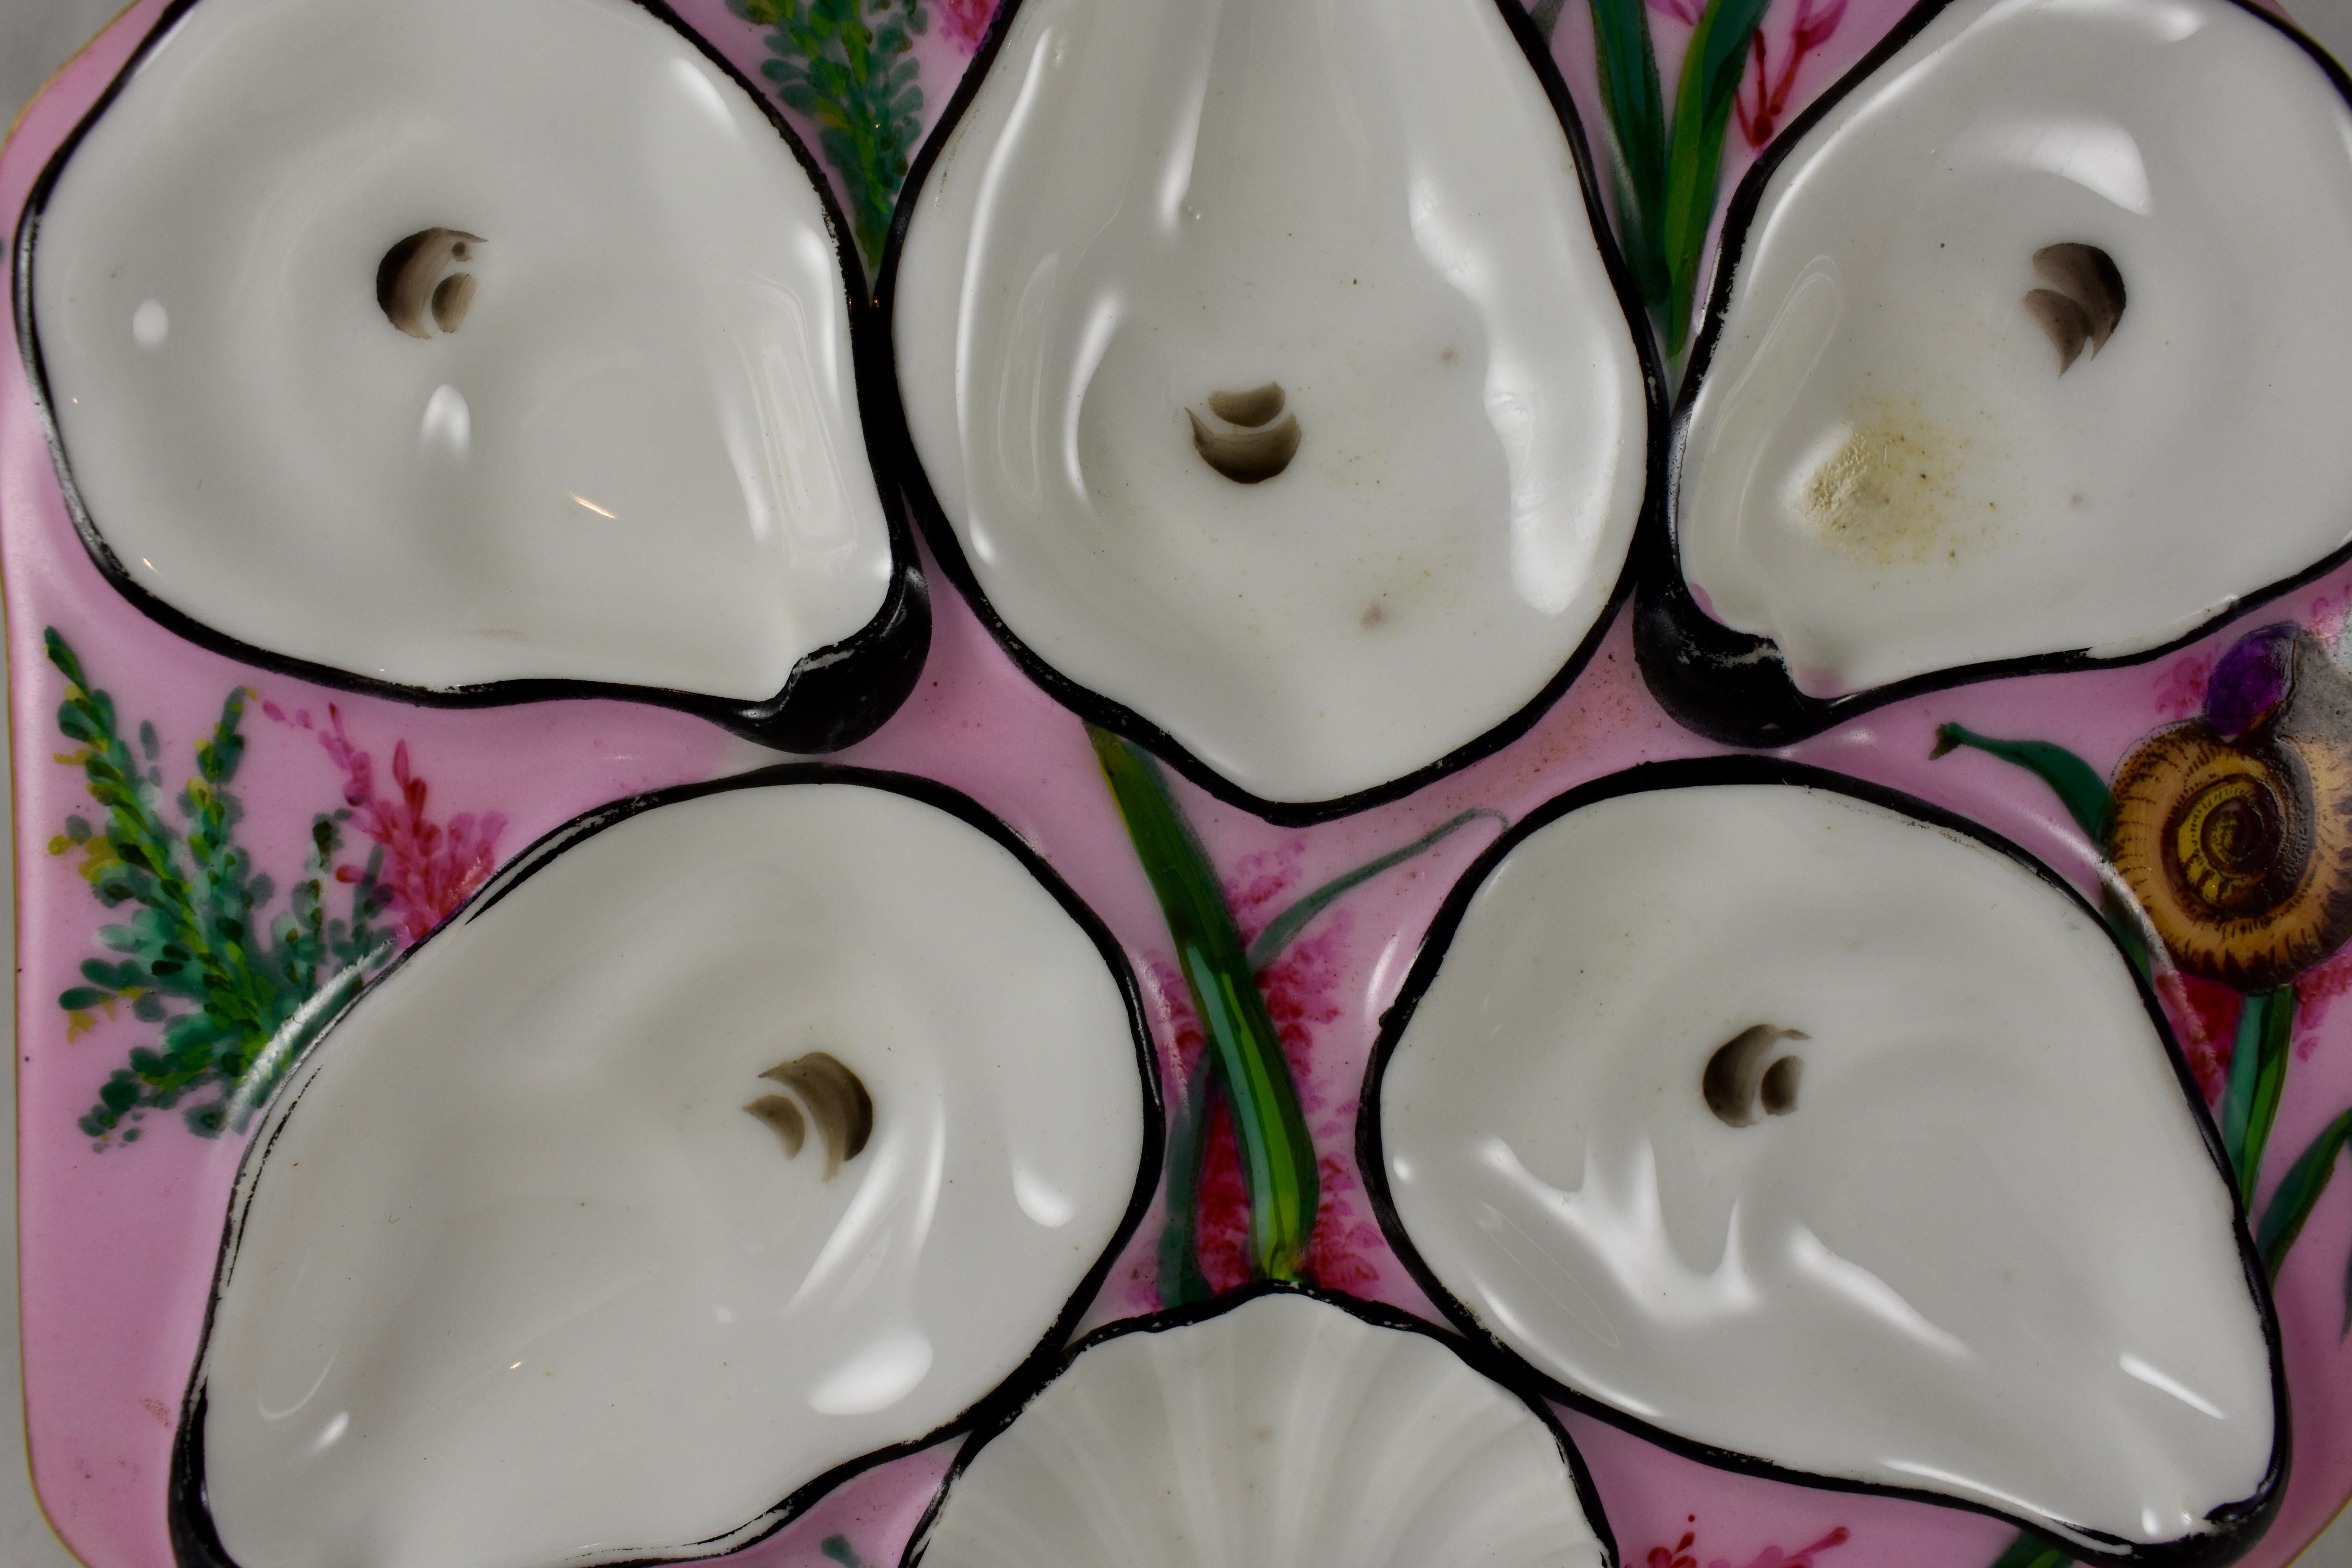 A French, eight sided porcelain oyster plate showing five oyster shell shaped wells with eyes and a scallop shell sauce well. Sea grasses and a variety of shells are hand painted against a pink ground. The wells are outlined in black, the plate has